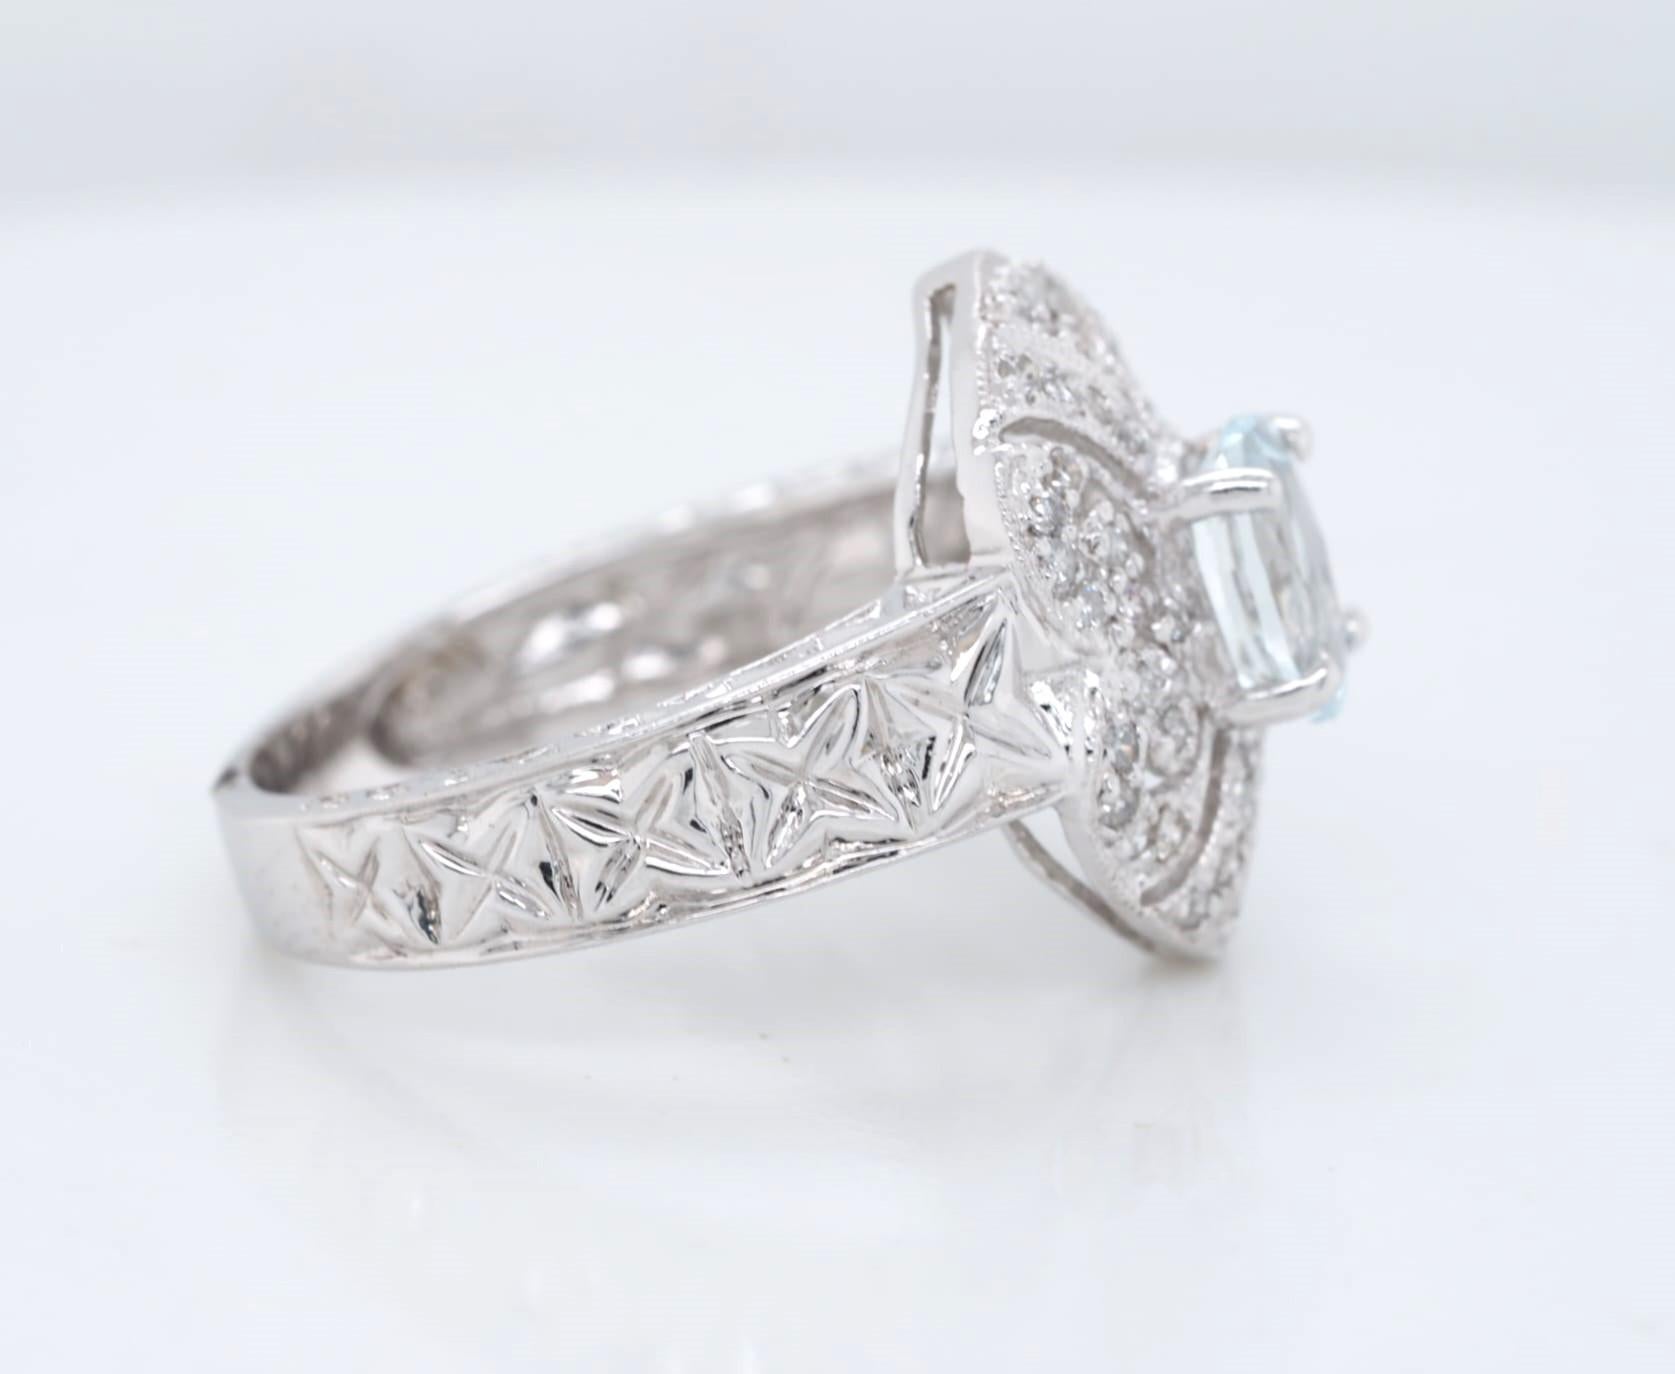 This exquisite ring is crafted from 14k white gold and features an oval cut aquamarine stone as its centerpiece. The aquamarine is complemented by round cut diamonds, creating a stunning display of elegance and sophistication. The ring is perfect